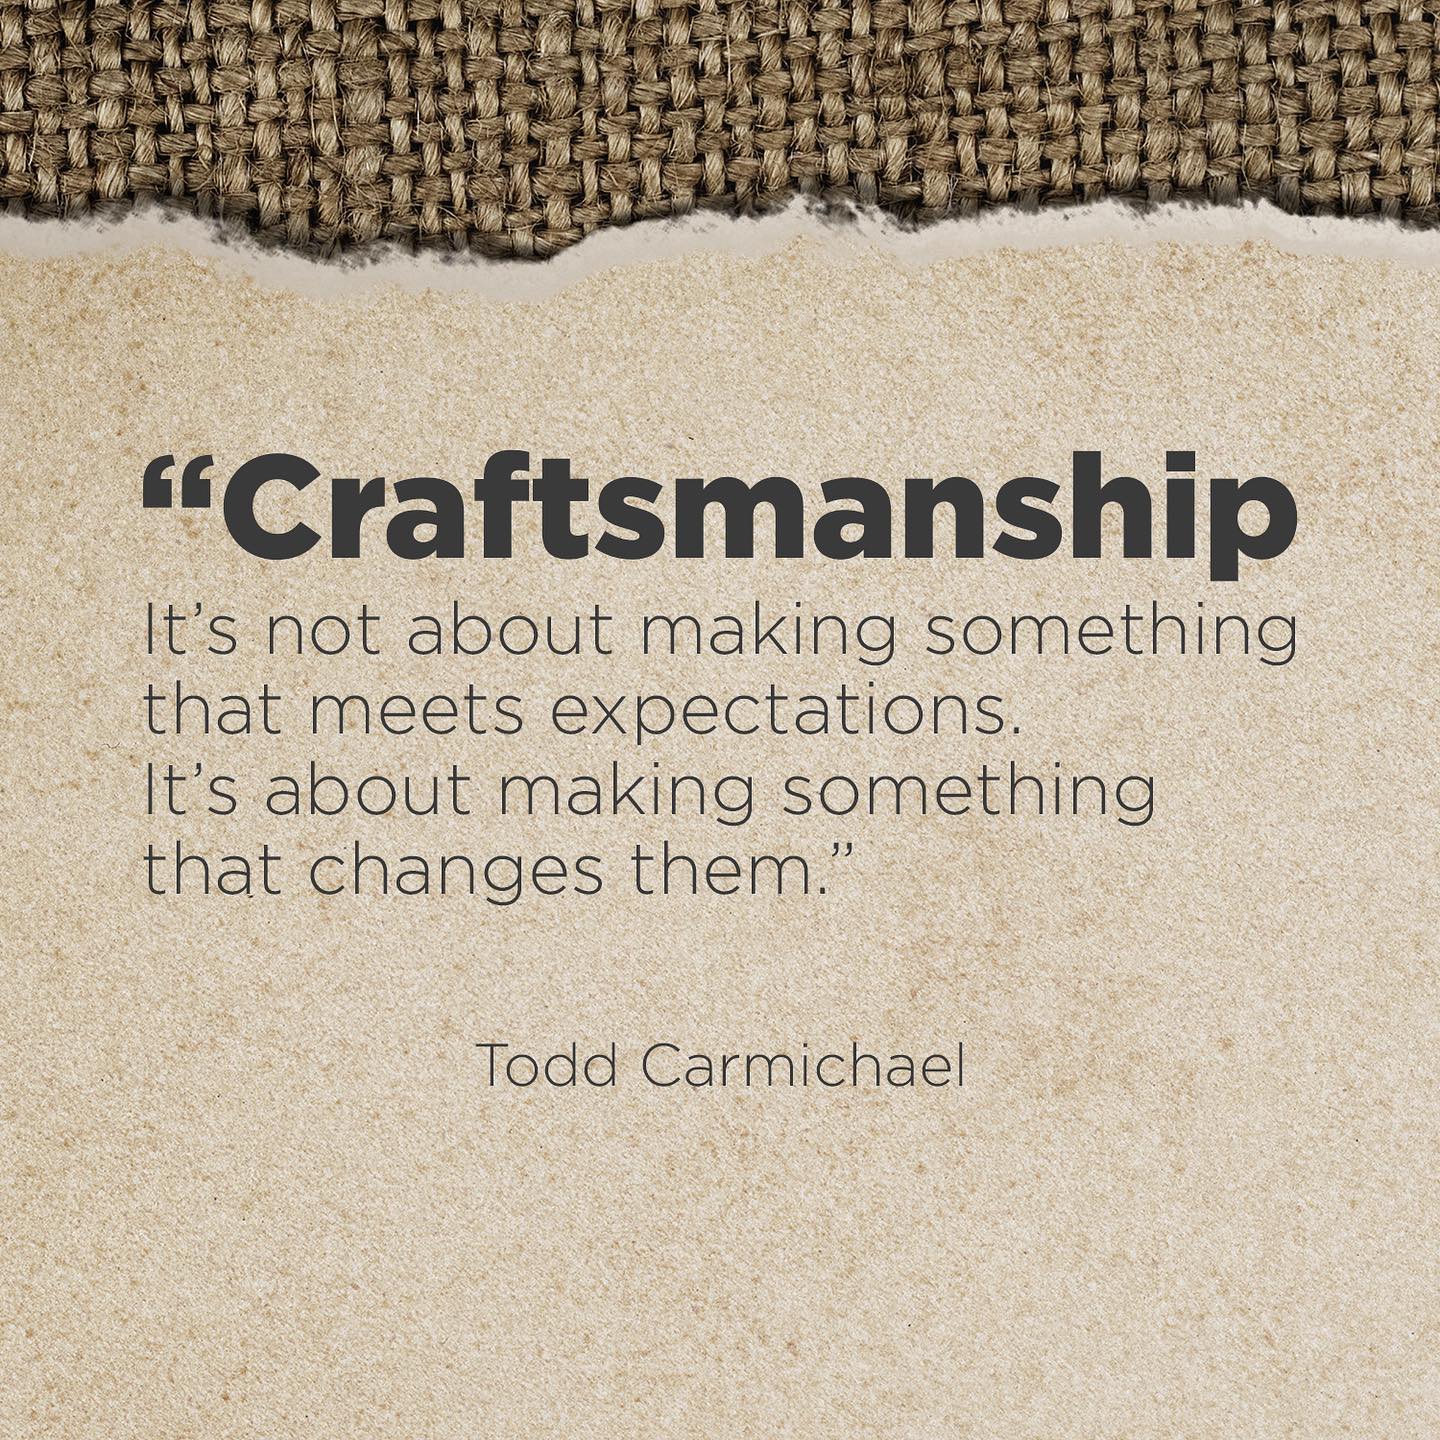 Craftsmanship - It's not about making something that meets expectations, it's about making something that changes them